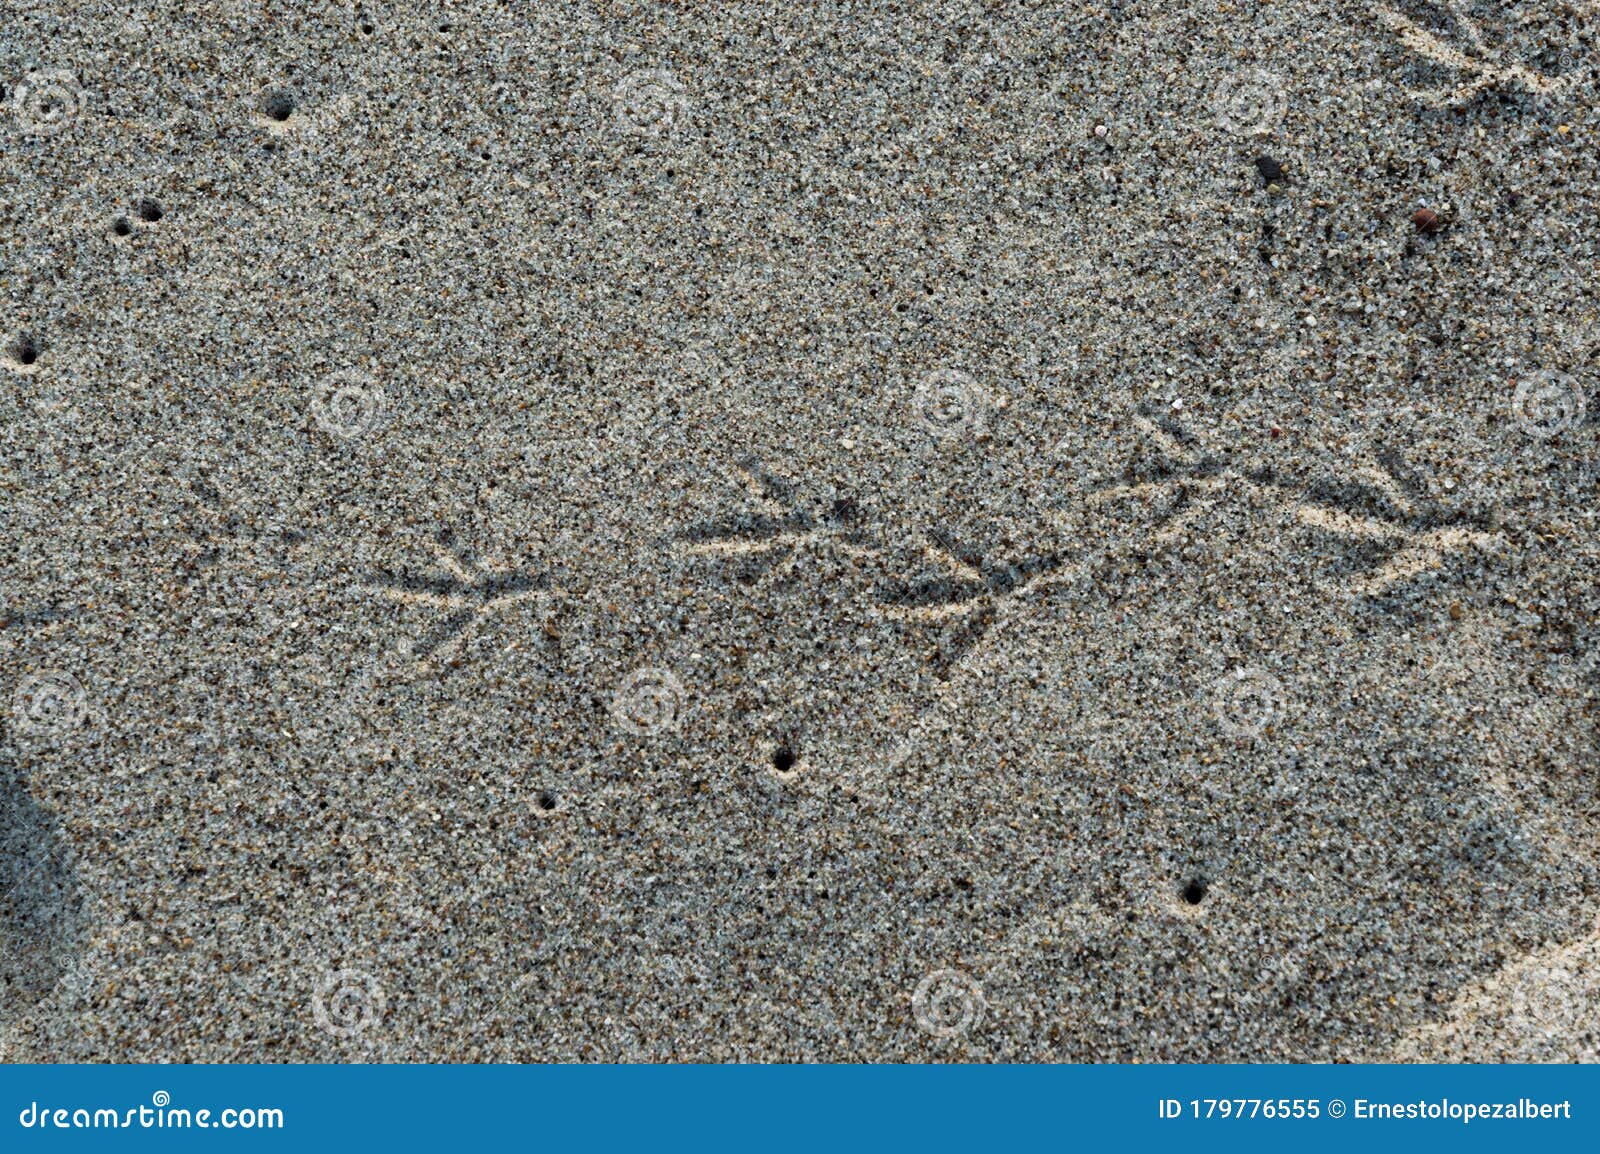 footprints of a bird in the sand on the beach